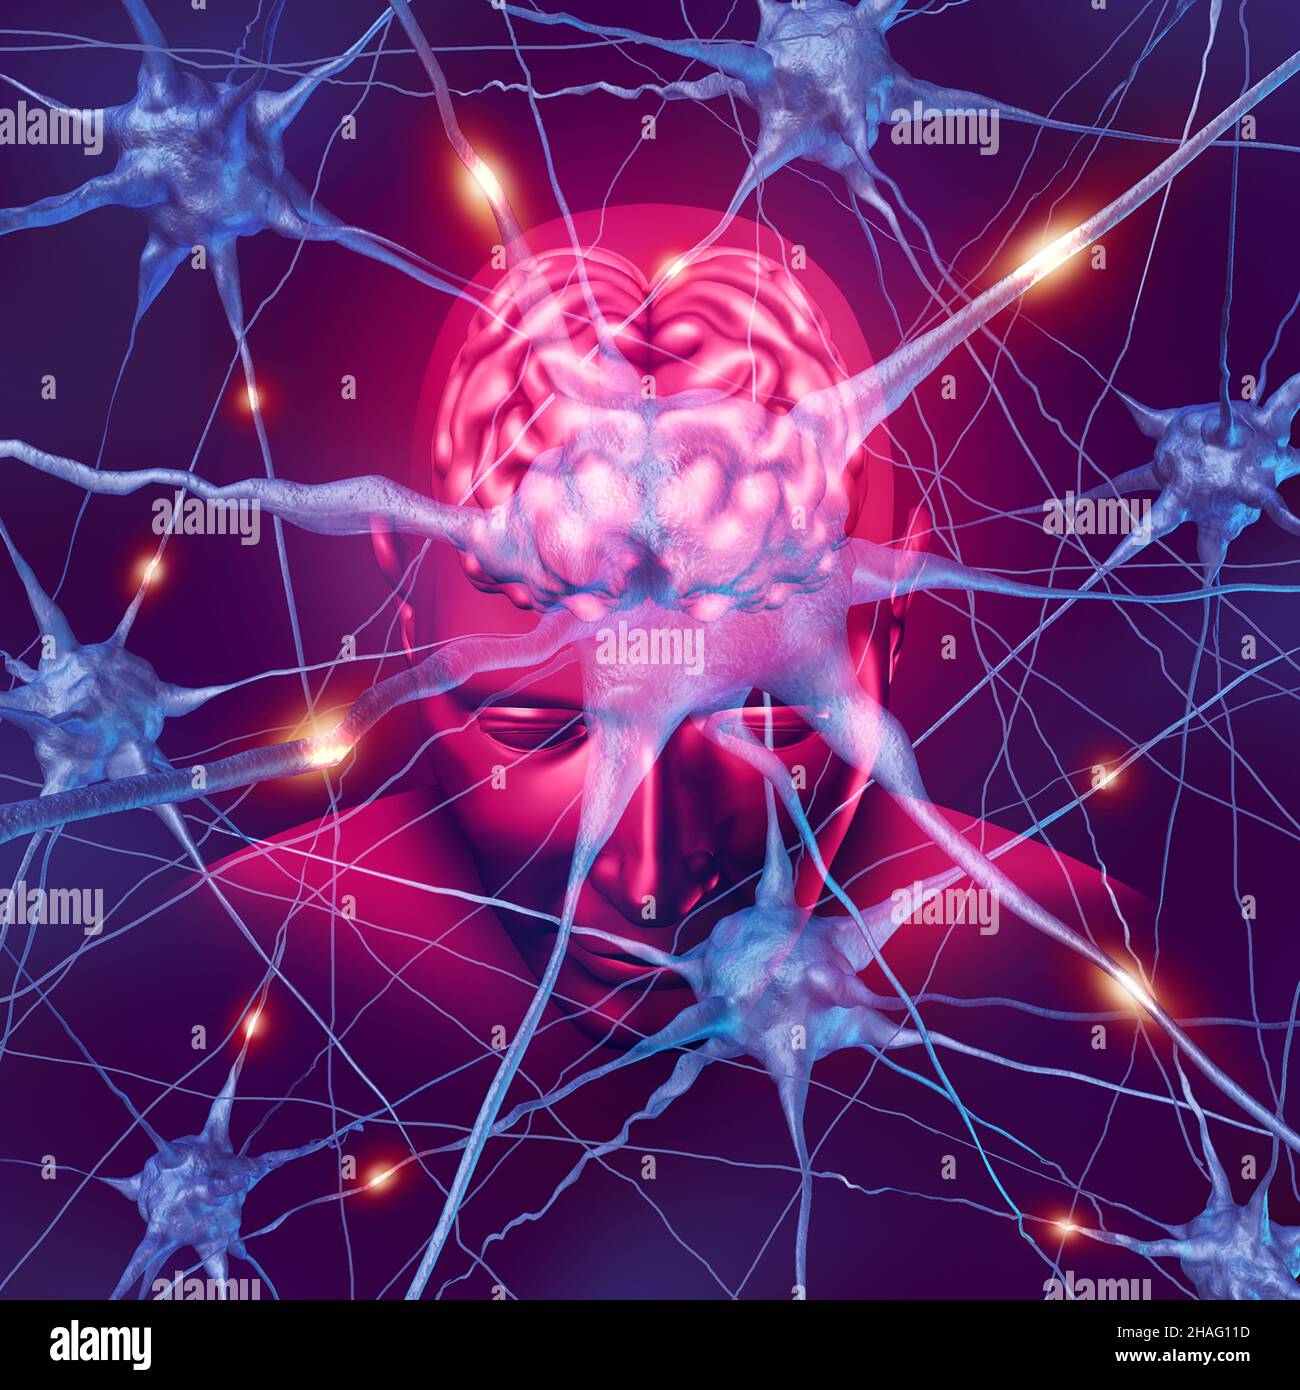 Human brain neurology and active neurons connections as a nervous system anatomy and neurological activity. Stock Photo